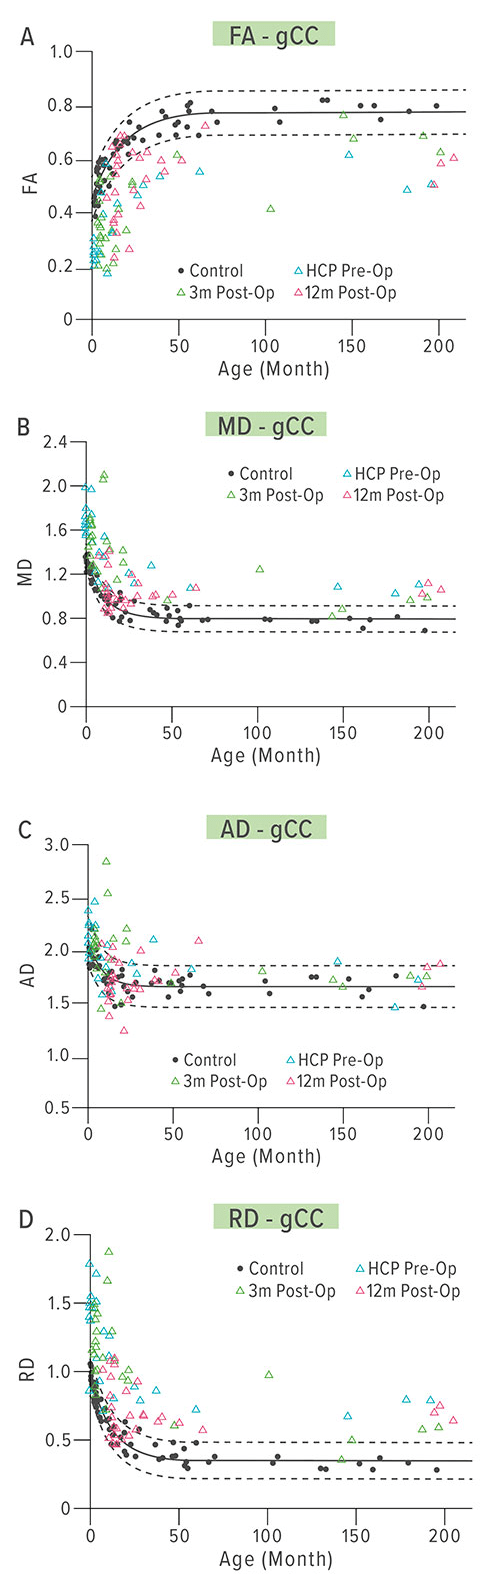 Fig A:  These scatter plots show four types of diffusion tensor imaging (DTI) measures conducted after patients received surgery for congenital hydrocephalus: (A) fractional anisotropy, (B) mean diffusivity, (C) axial diffusivity and (D)  radial diffusivity. Each symbol represents the DTI value extracted from a single participant.  The solid black line and two dashed lines show results of regression analysis based on the control group. The study suggests that DTI can serve as a sensitive imaging biomarker for underlying neuroanatomical changes and post-surgical developmental outcome, and even as a predictor for future outcomes.